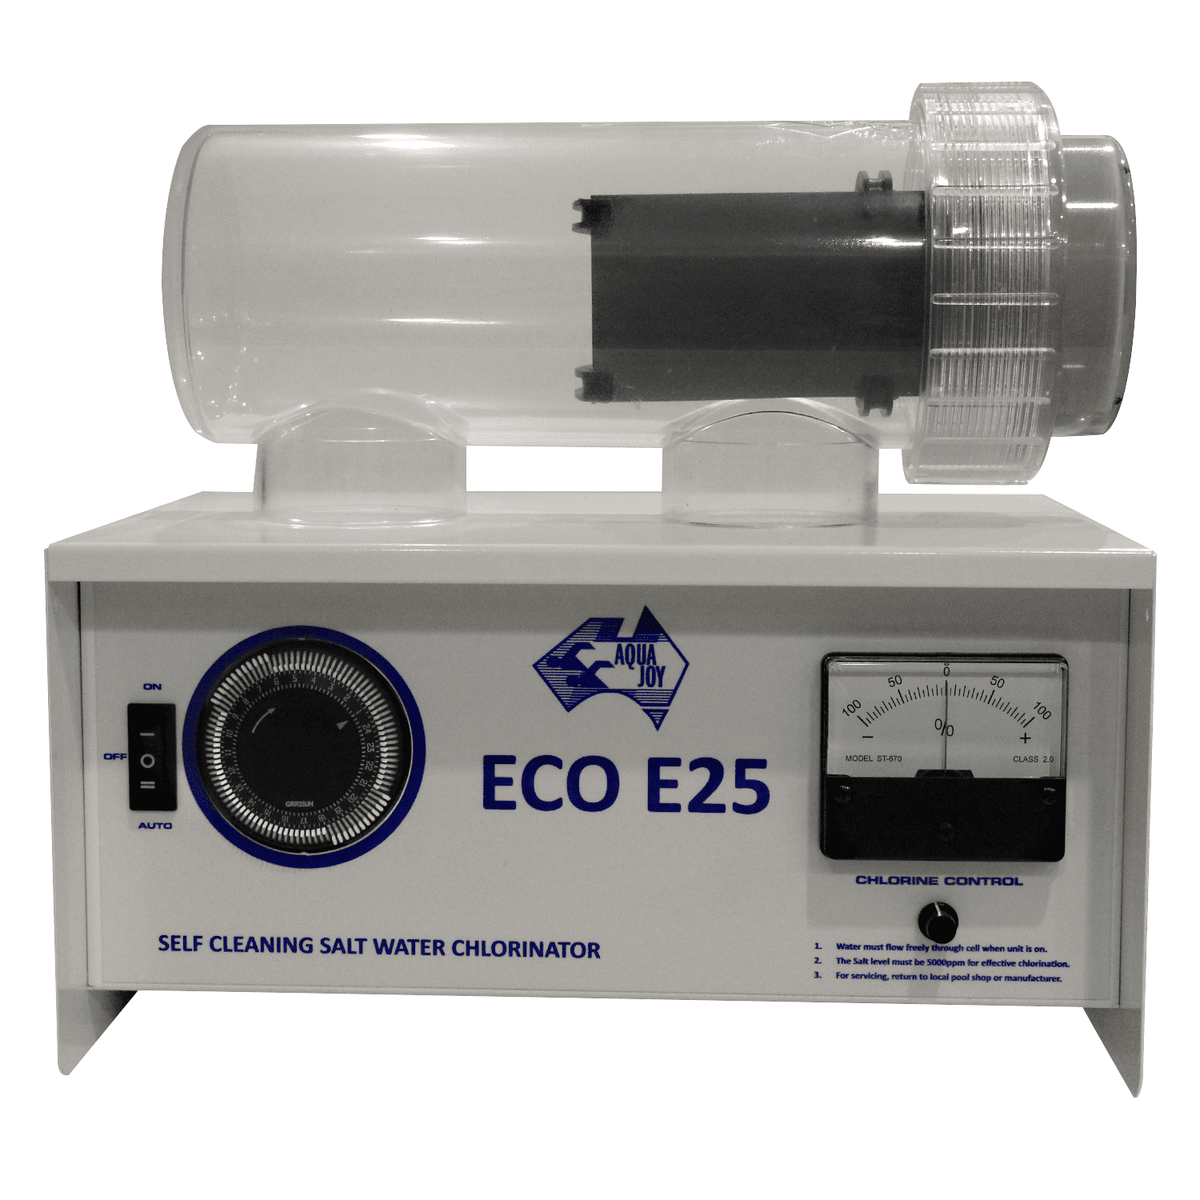 Self Cleaning Chlorinator - AquaJoy Eco E25 - Purify Your Pool Hassle-Free!